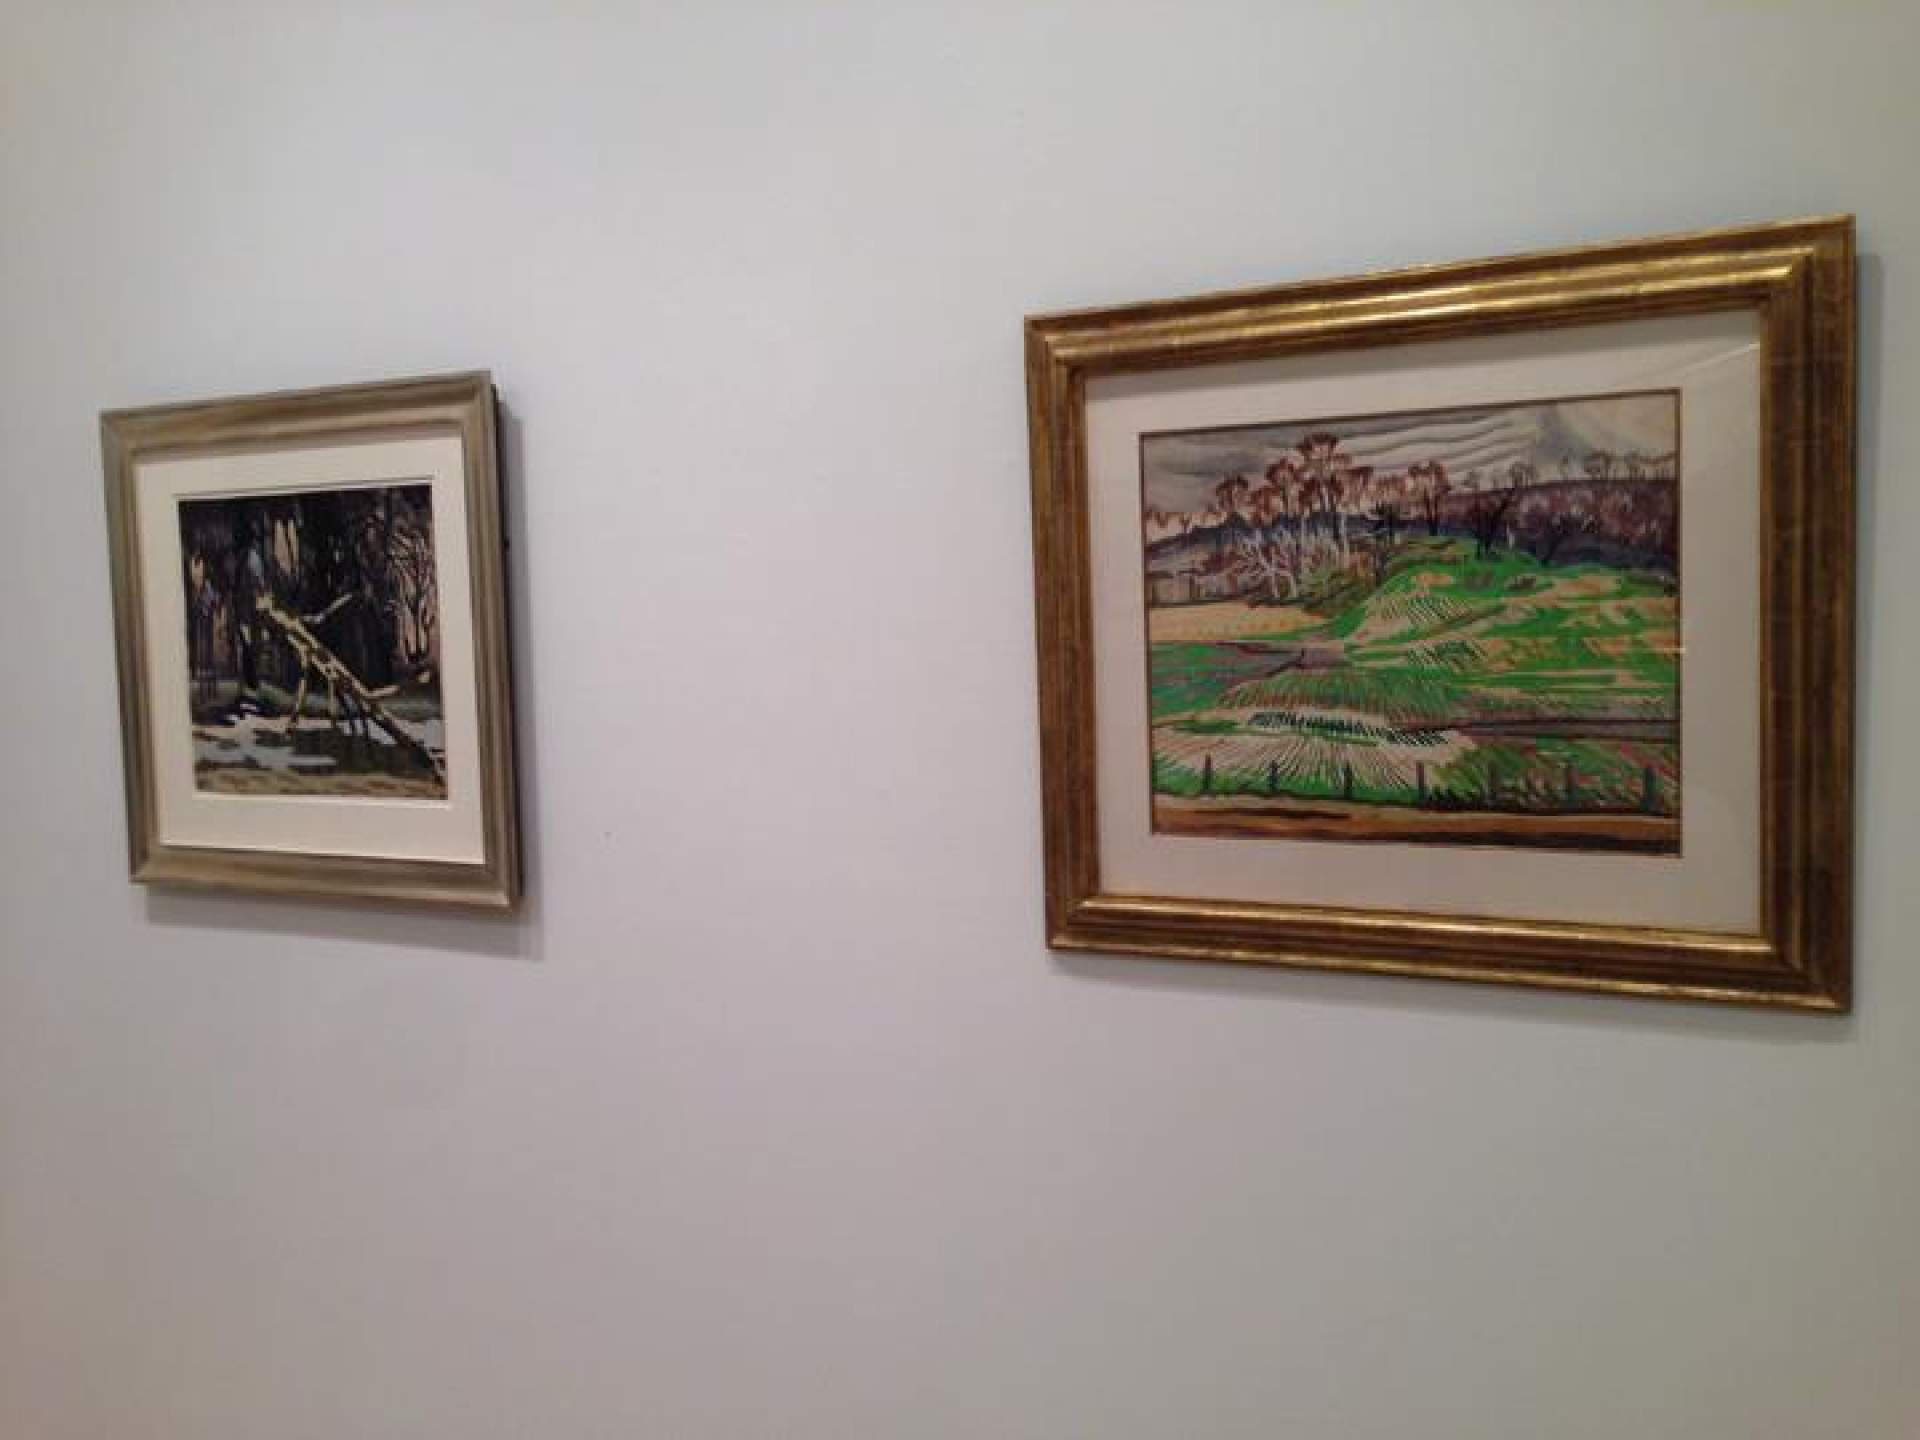 Charles Burchfield: American Landscapes exhibition at DC Moore Gallery